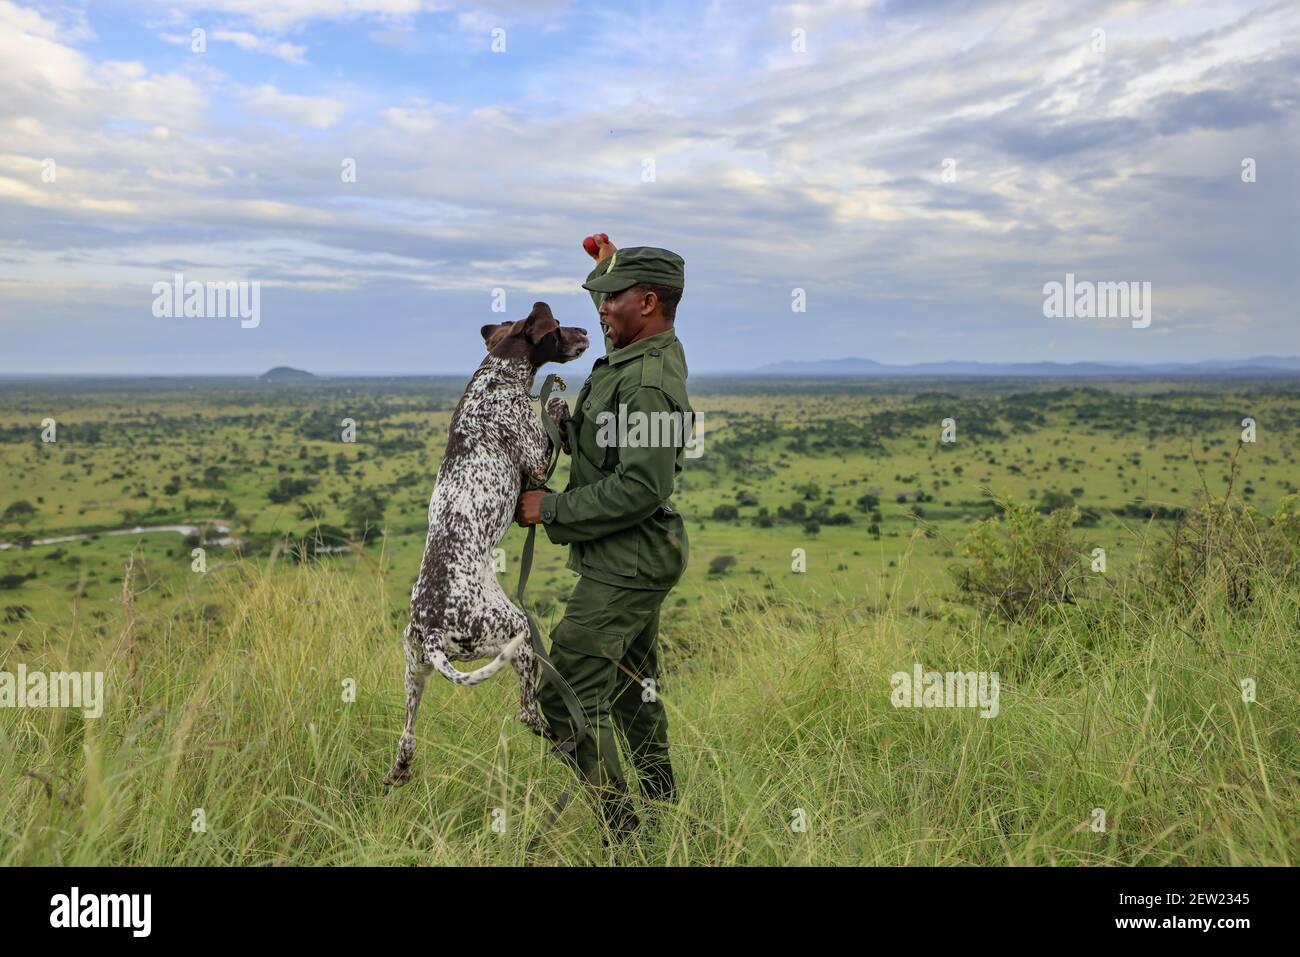 Tanzania, Serengeti National Park, Ikoma, The K9 unit is out, and Oscar and his dog handler Jamali take the opportunity to do some exercises, Oscar must grab the reward stick, which he prefers to any other reward, an opportunity for play and physical training Stock Photo